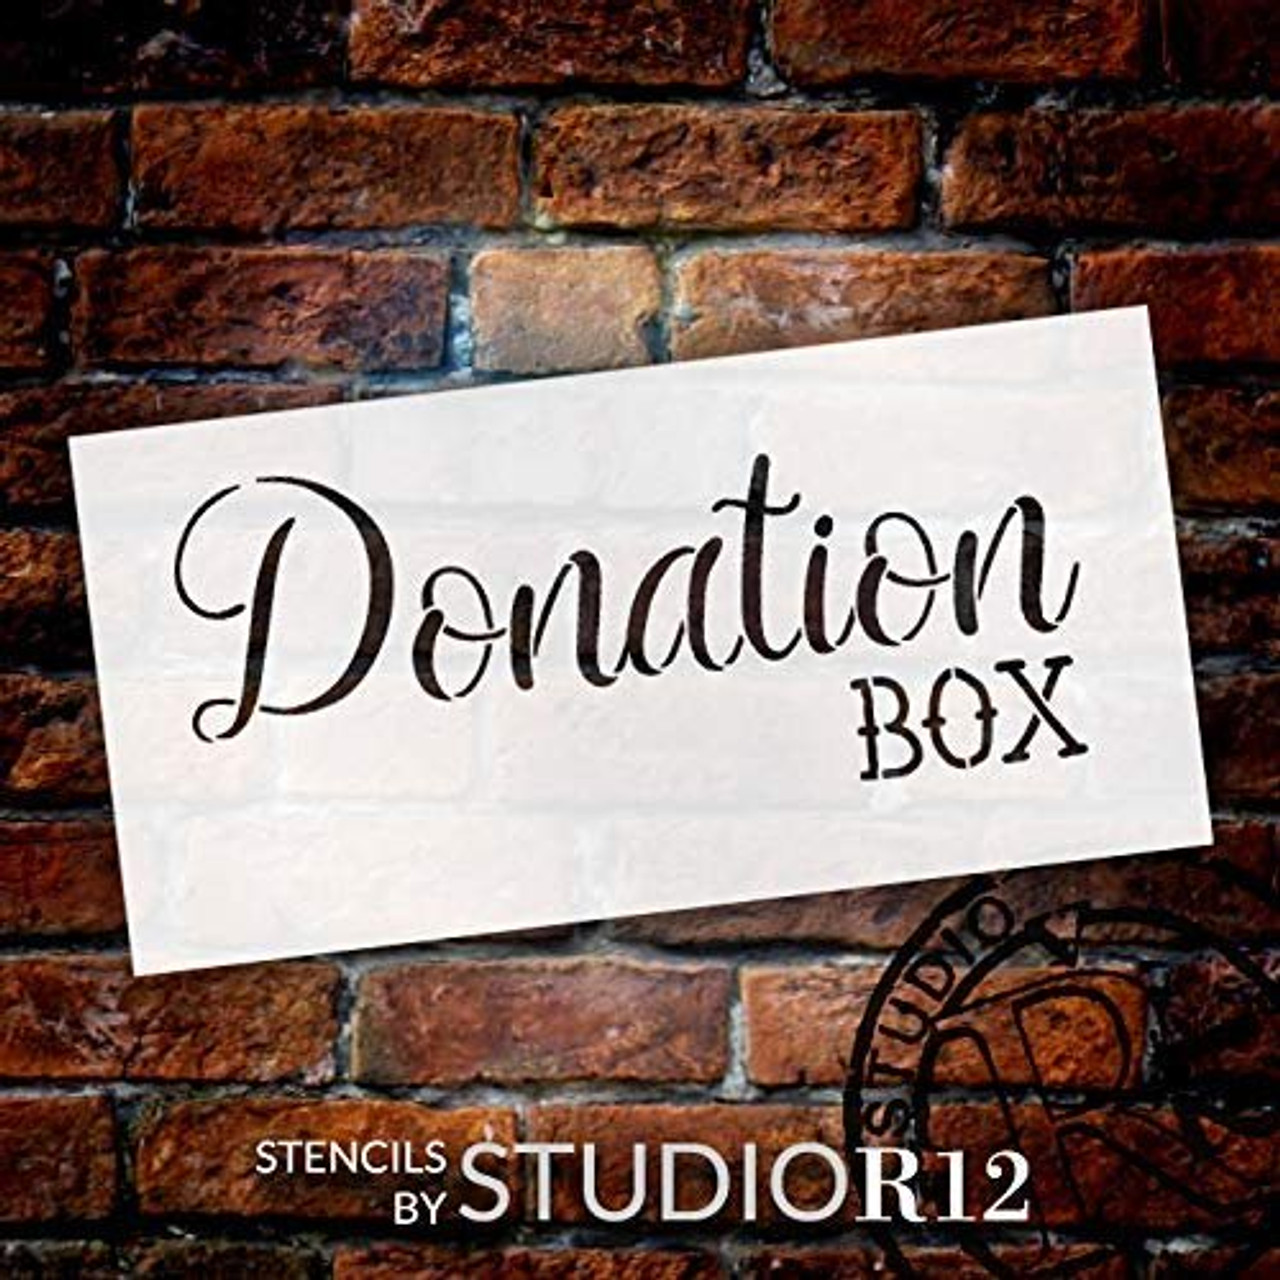 Donation Box Stencil by StudioR12 | DIY for Charity Fundraiser | Church or School Group Service Project | Craft & Paint Wood Signs | Reusable Mylar Template | Select Size